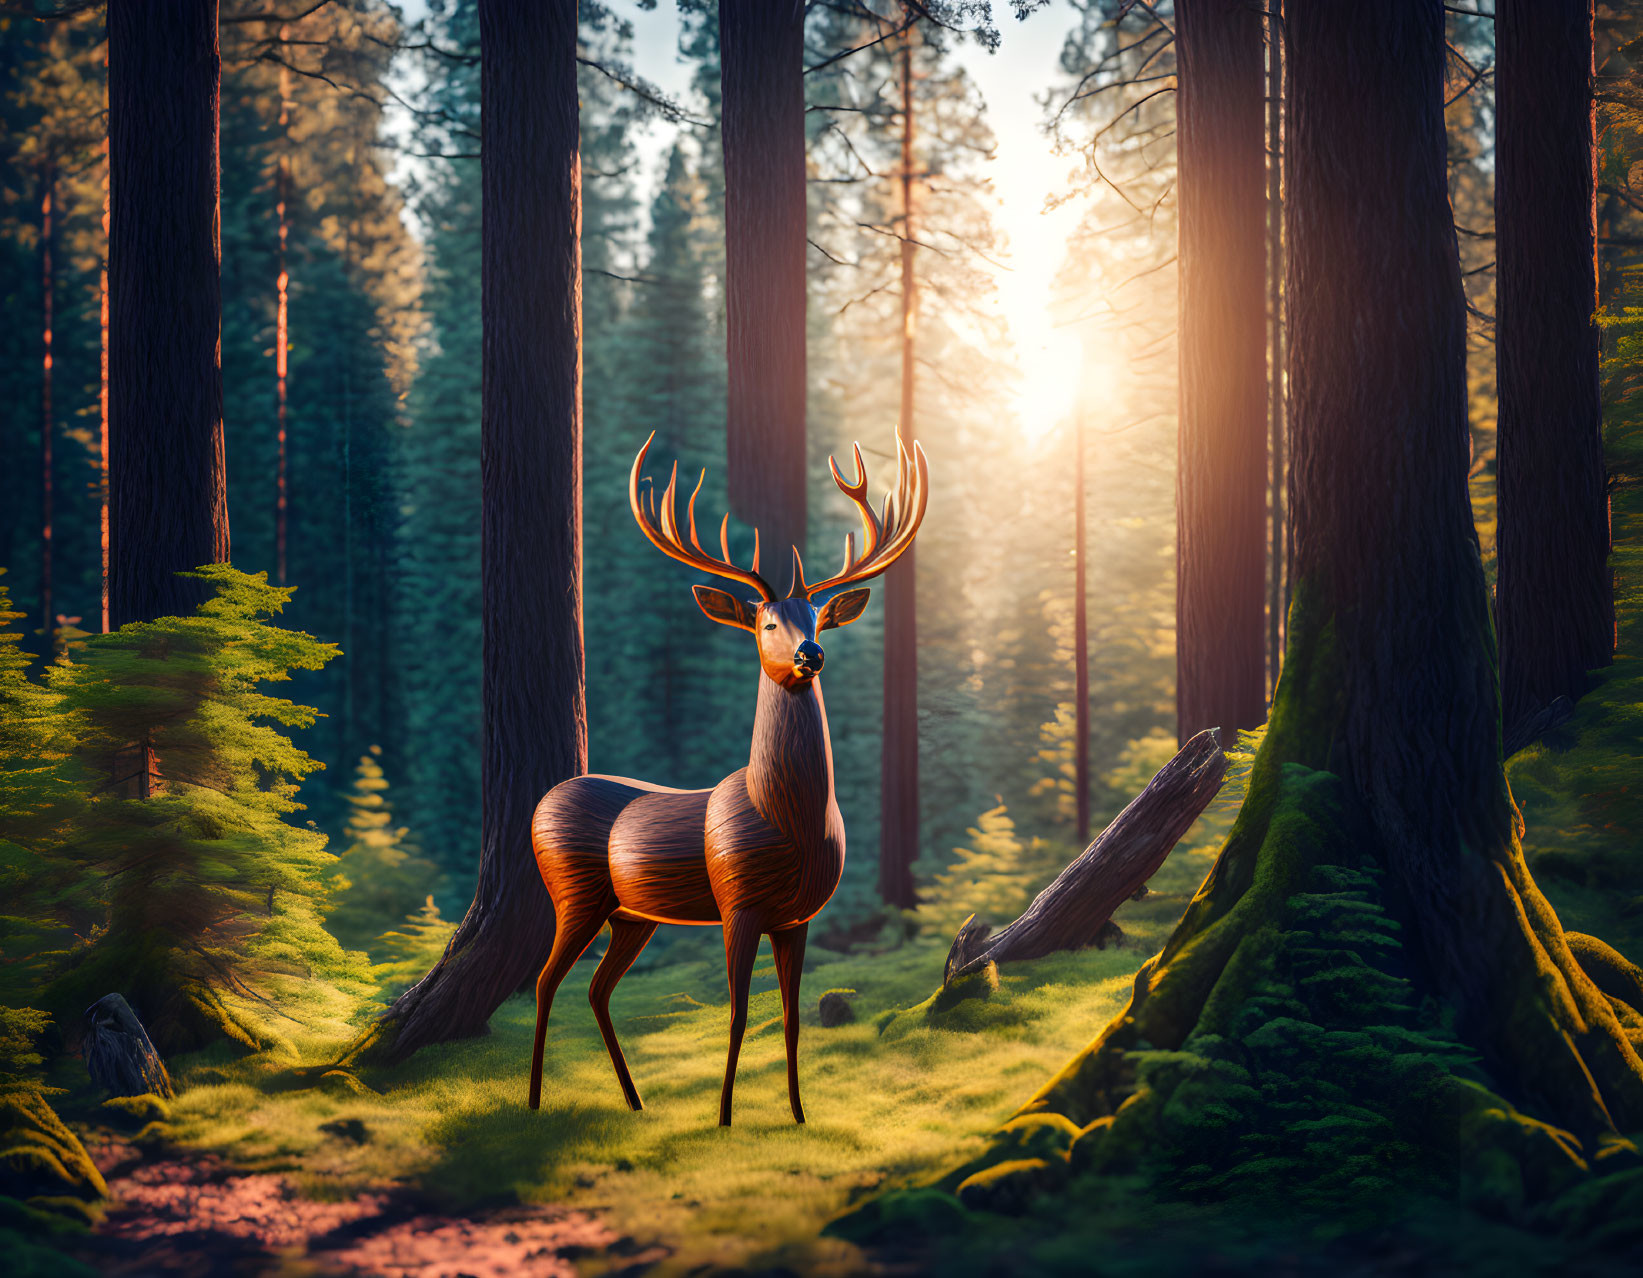 Majestic stag in sunlit forest clearing surrounded by towering trees